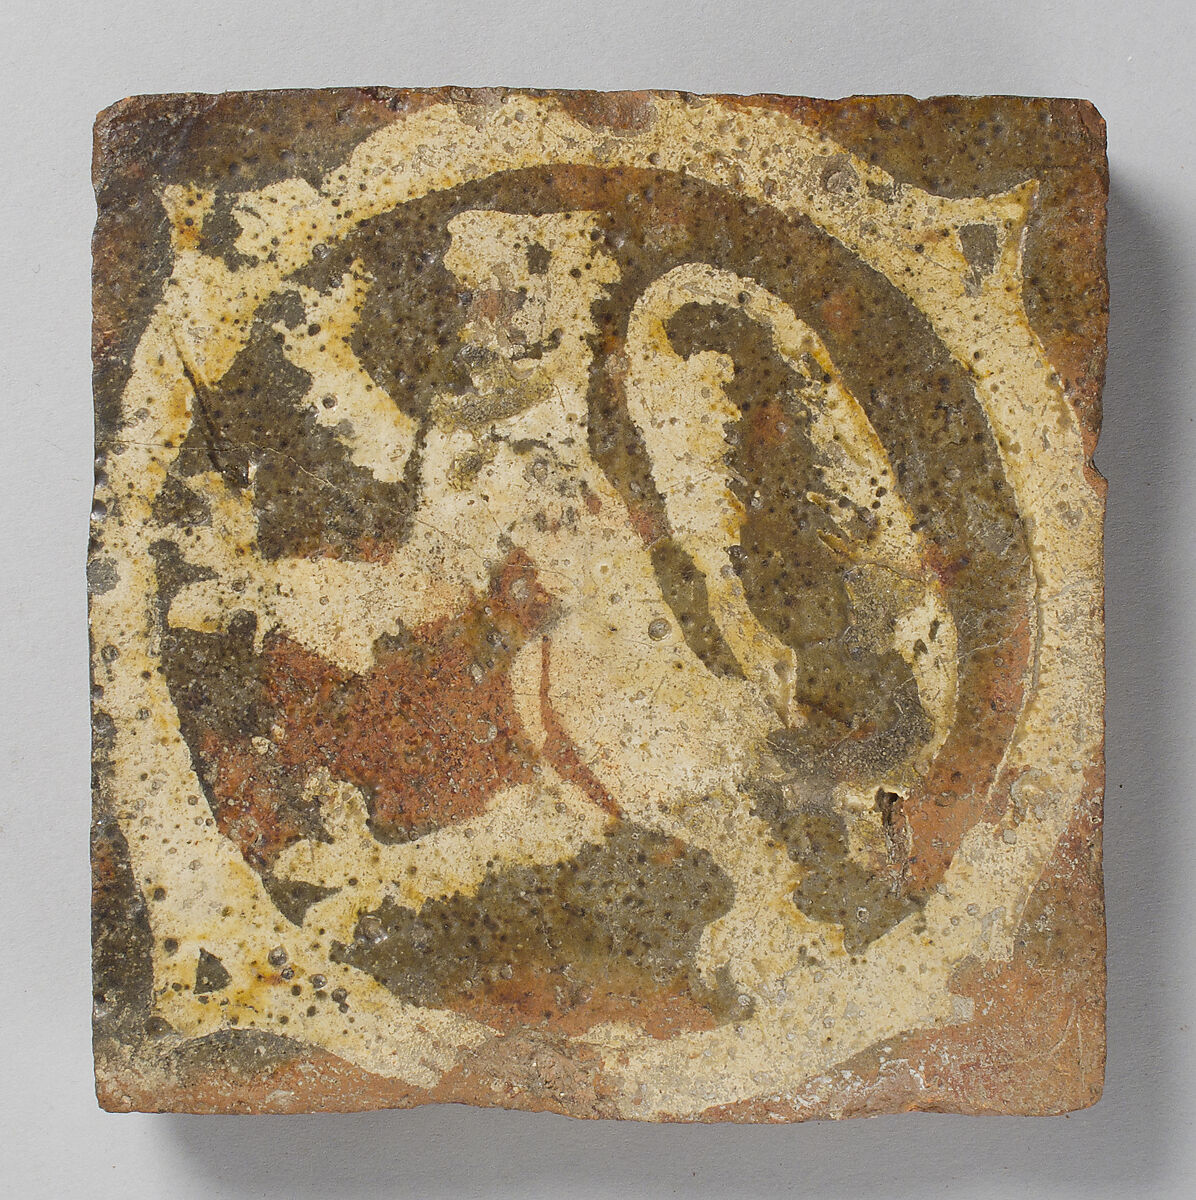 Tile with rampant lion, Fired earthenware, with slip decoration and lead glaze, British 